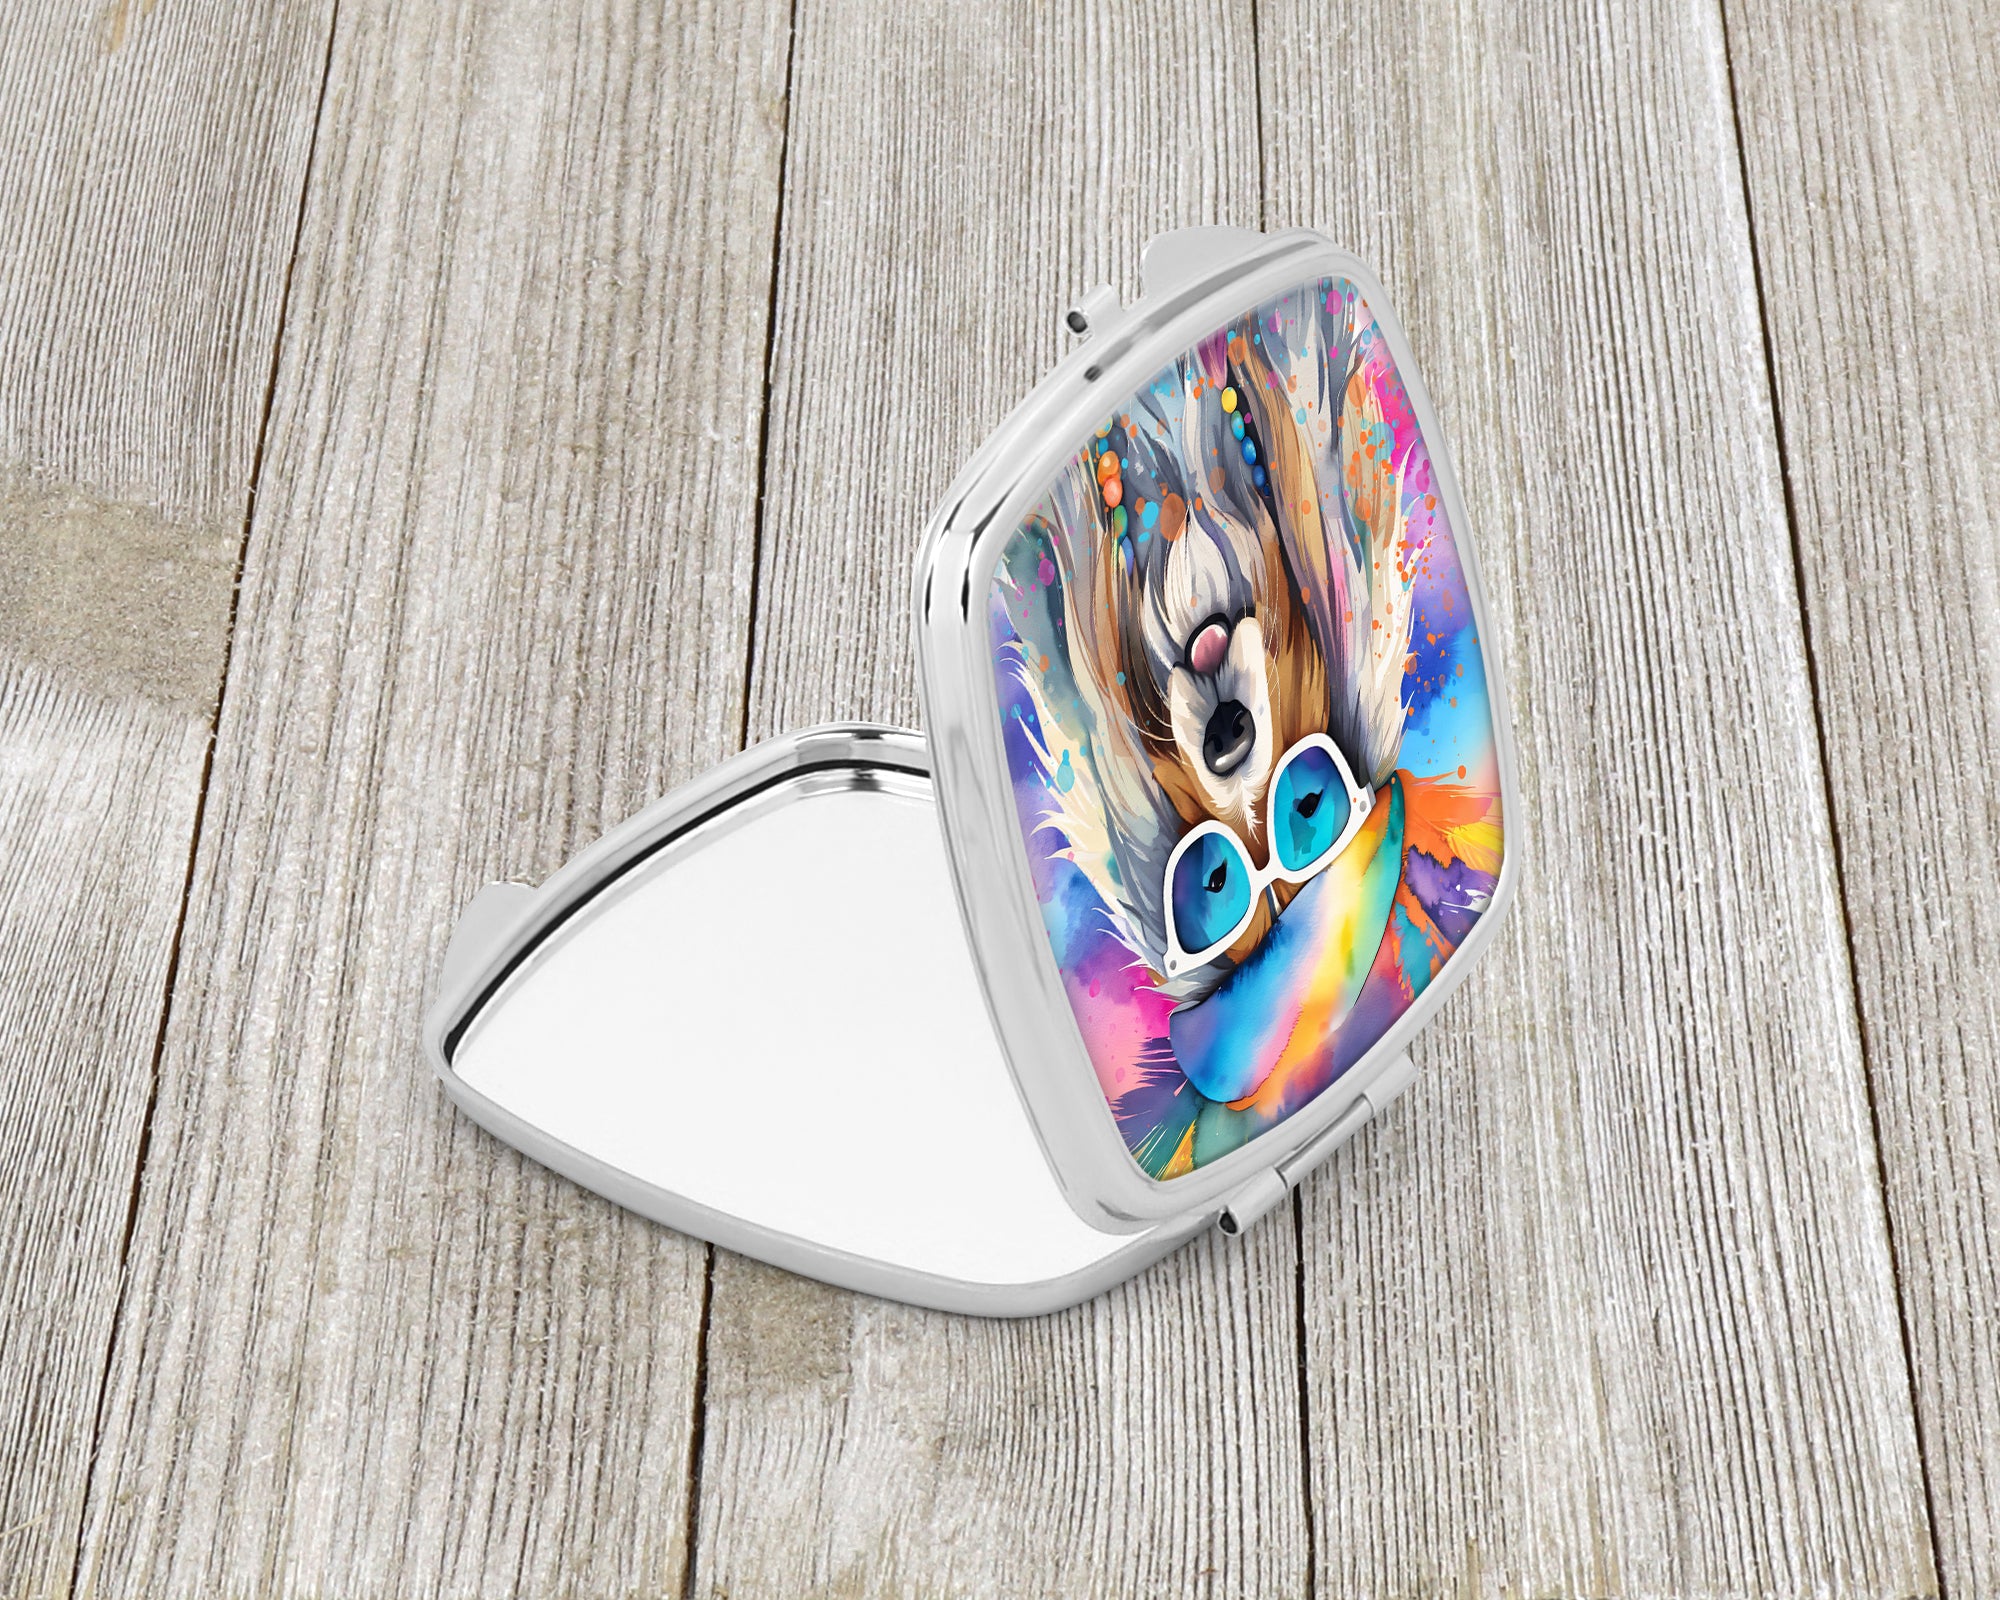 Buy this Bearded Collie Hippie Dawg Compact Mirror